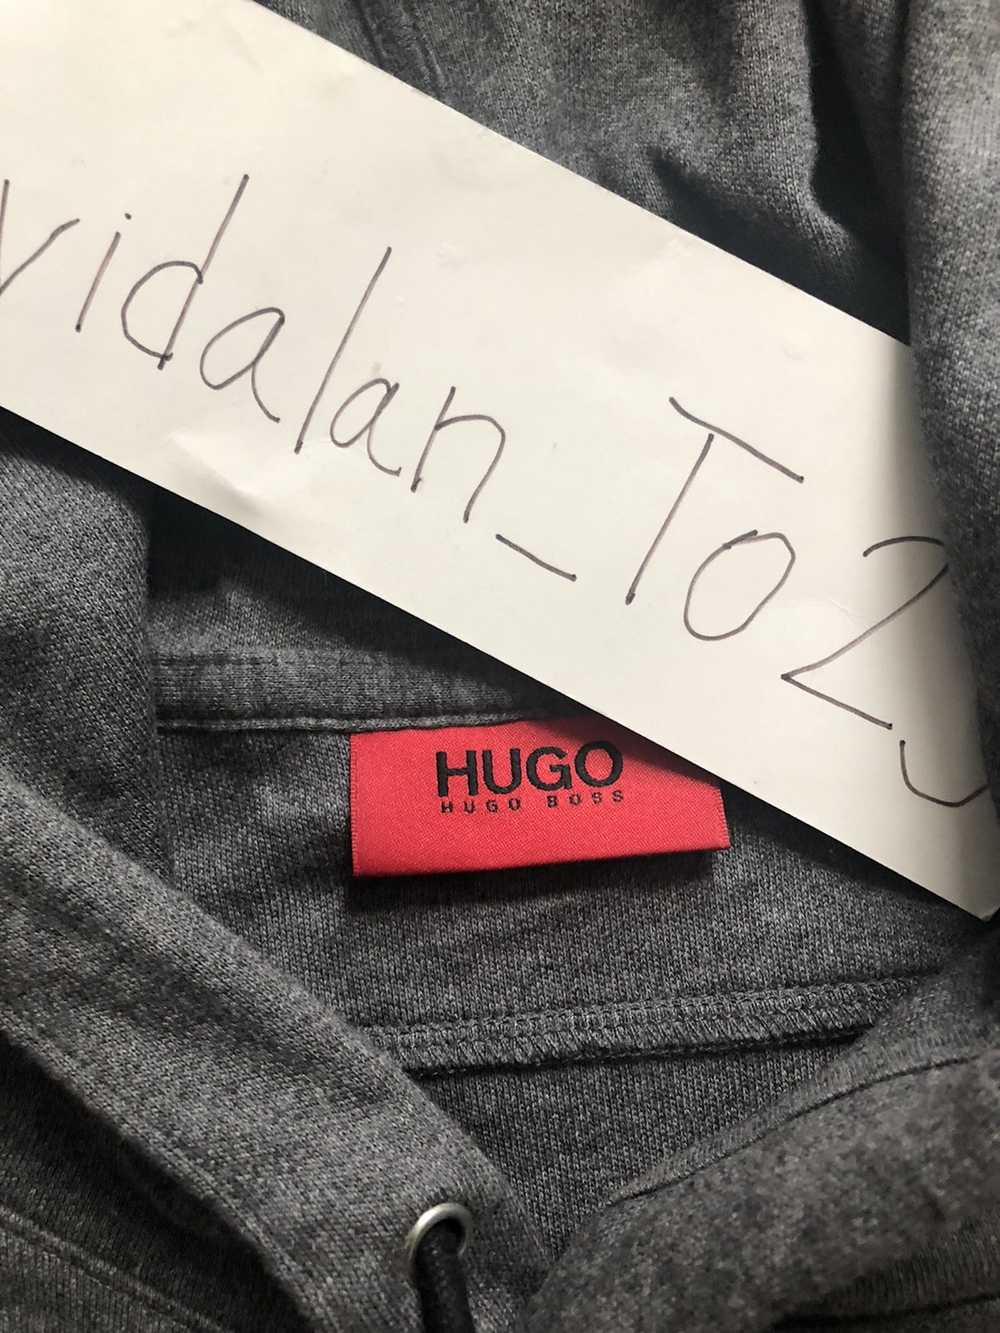 Lv. 100 Big Boss Pullover Hoodie for Sale by DripGod69